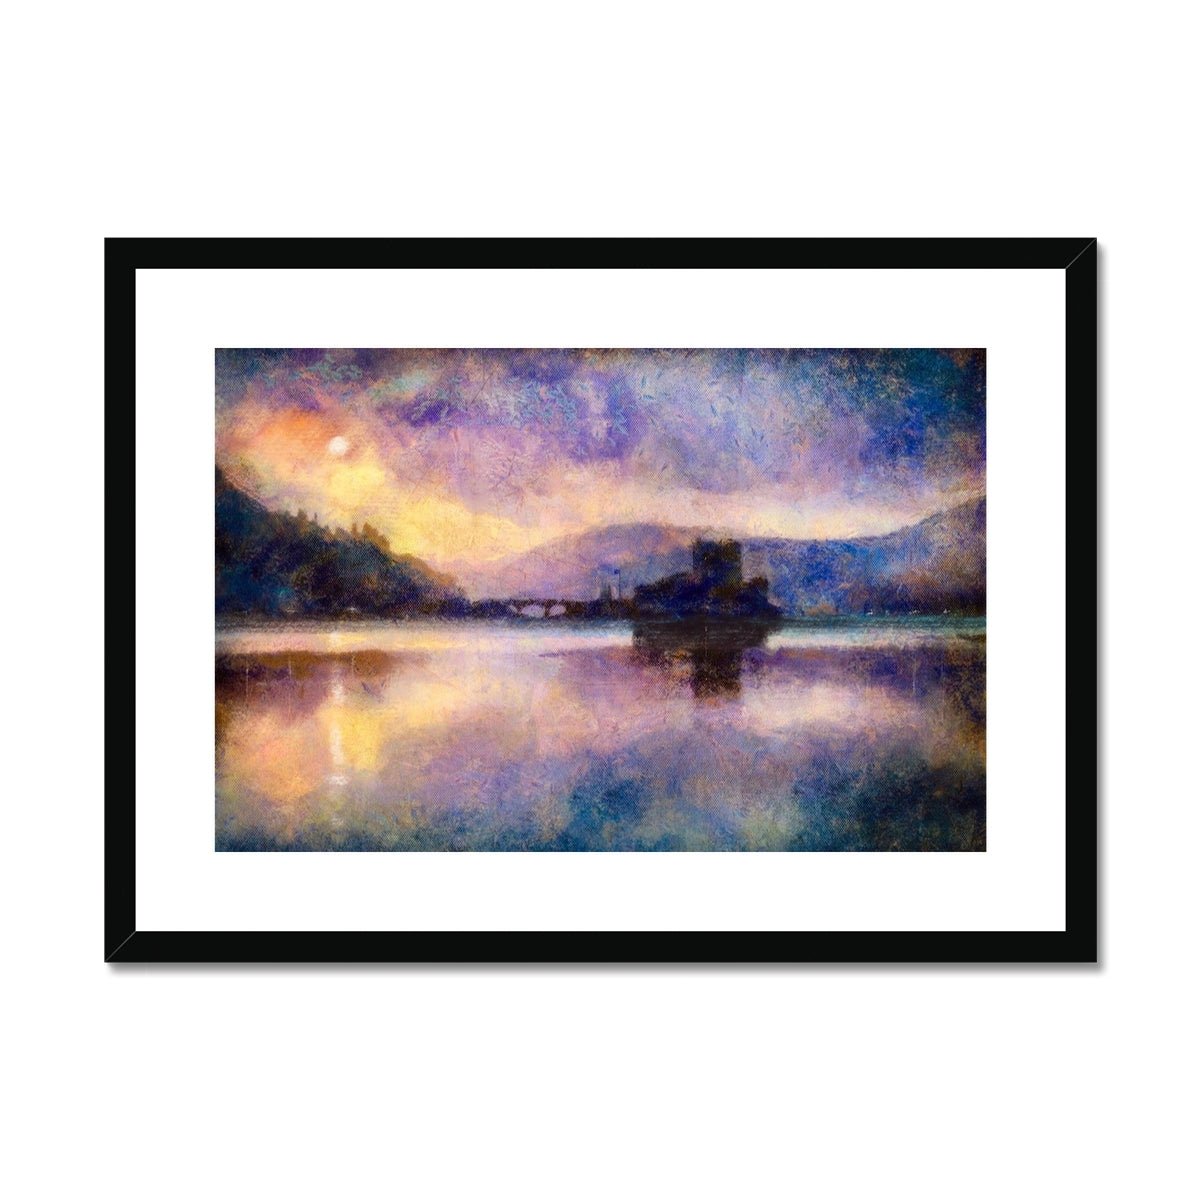 Eilean Donan Castle Moonlight Painting | Framed & Mounted Prints From Scotland-Framed & Mounted Prints-Historic & Iconic Scotland Art Gallery-A2 Landscape-Black Frame-Paintings, Prints, Homeware, Art Gifts From Scotland By Scottish Artist Kevin Hunter